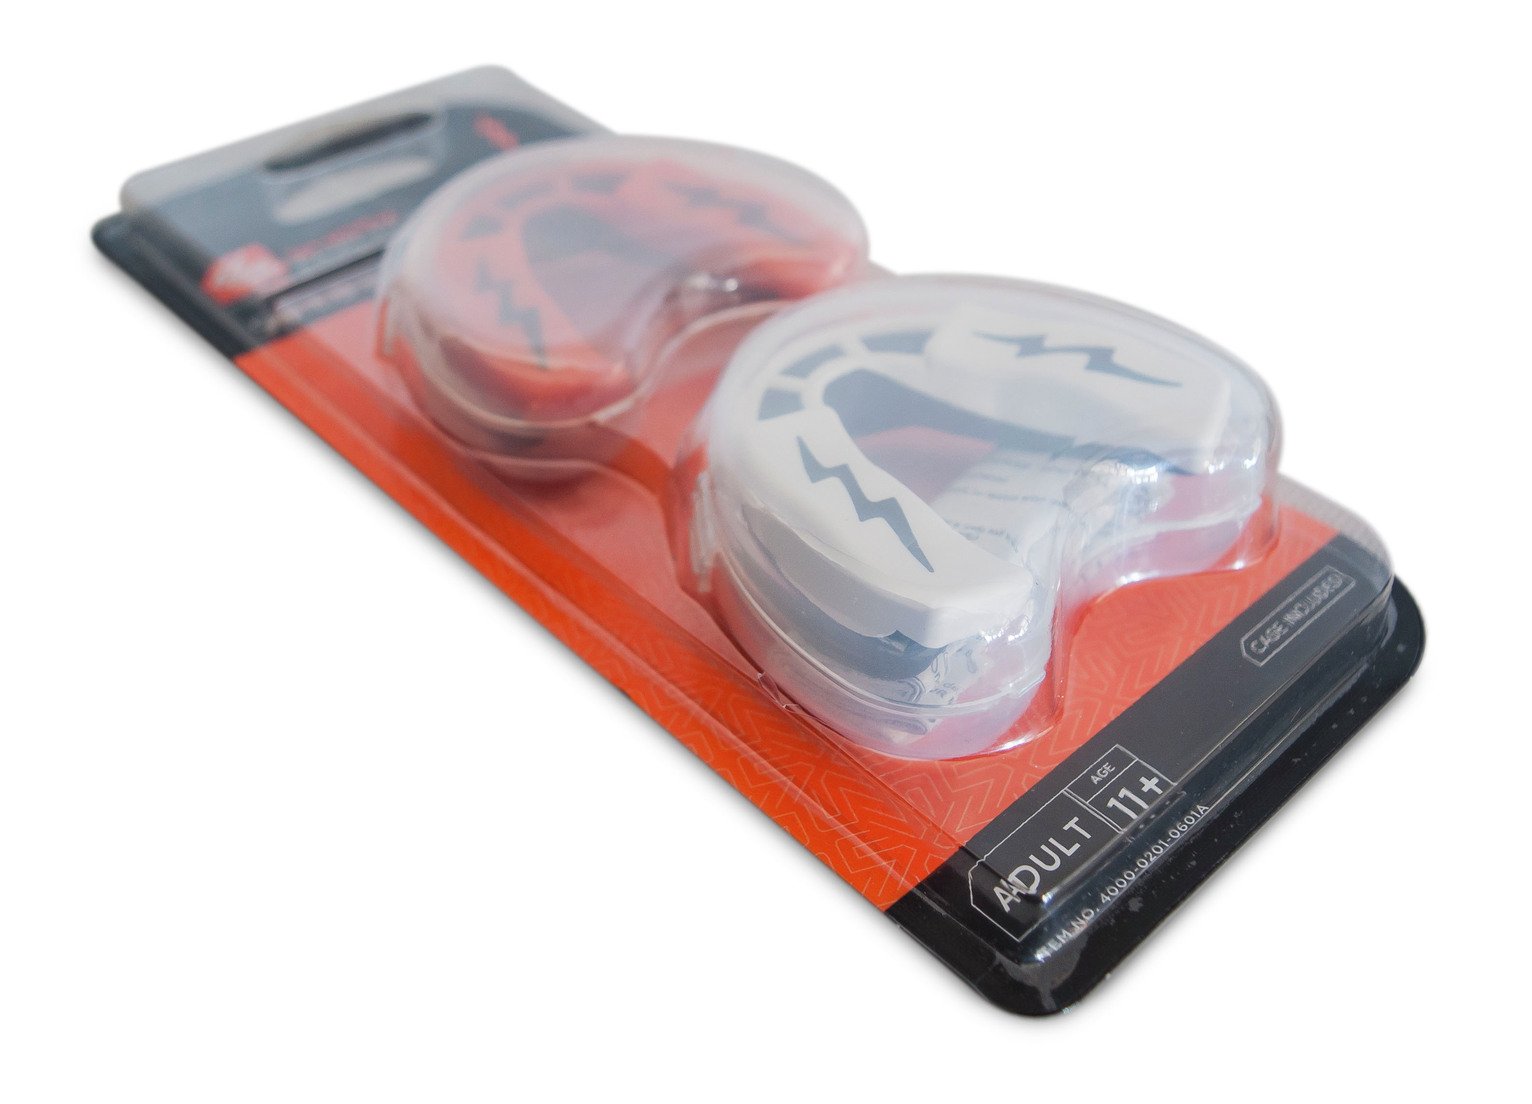 Shock Doctor V1.5 Adult Mouthguard Review